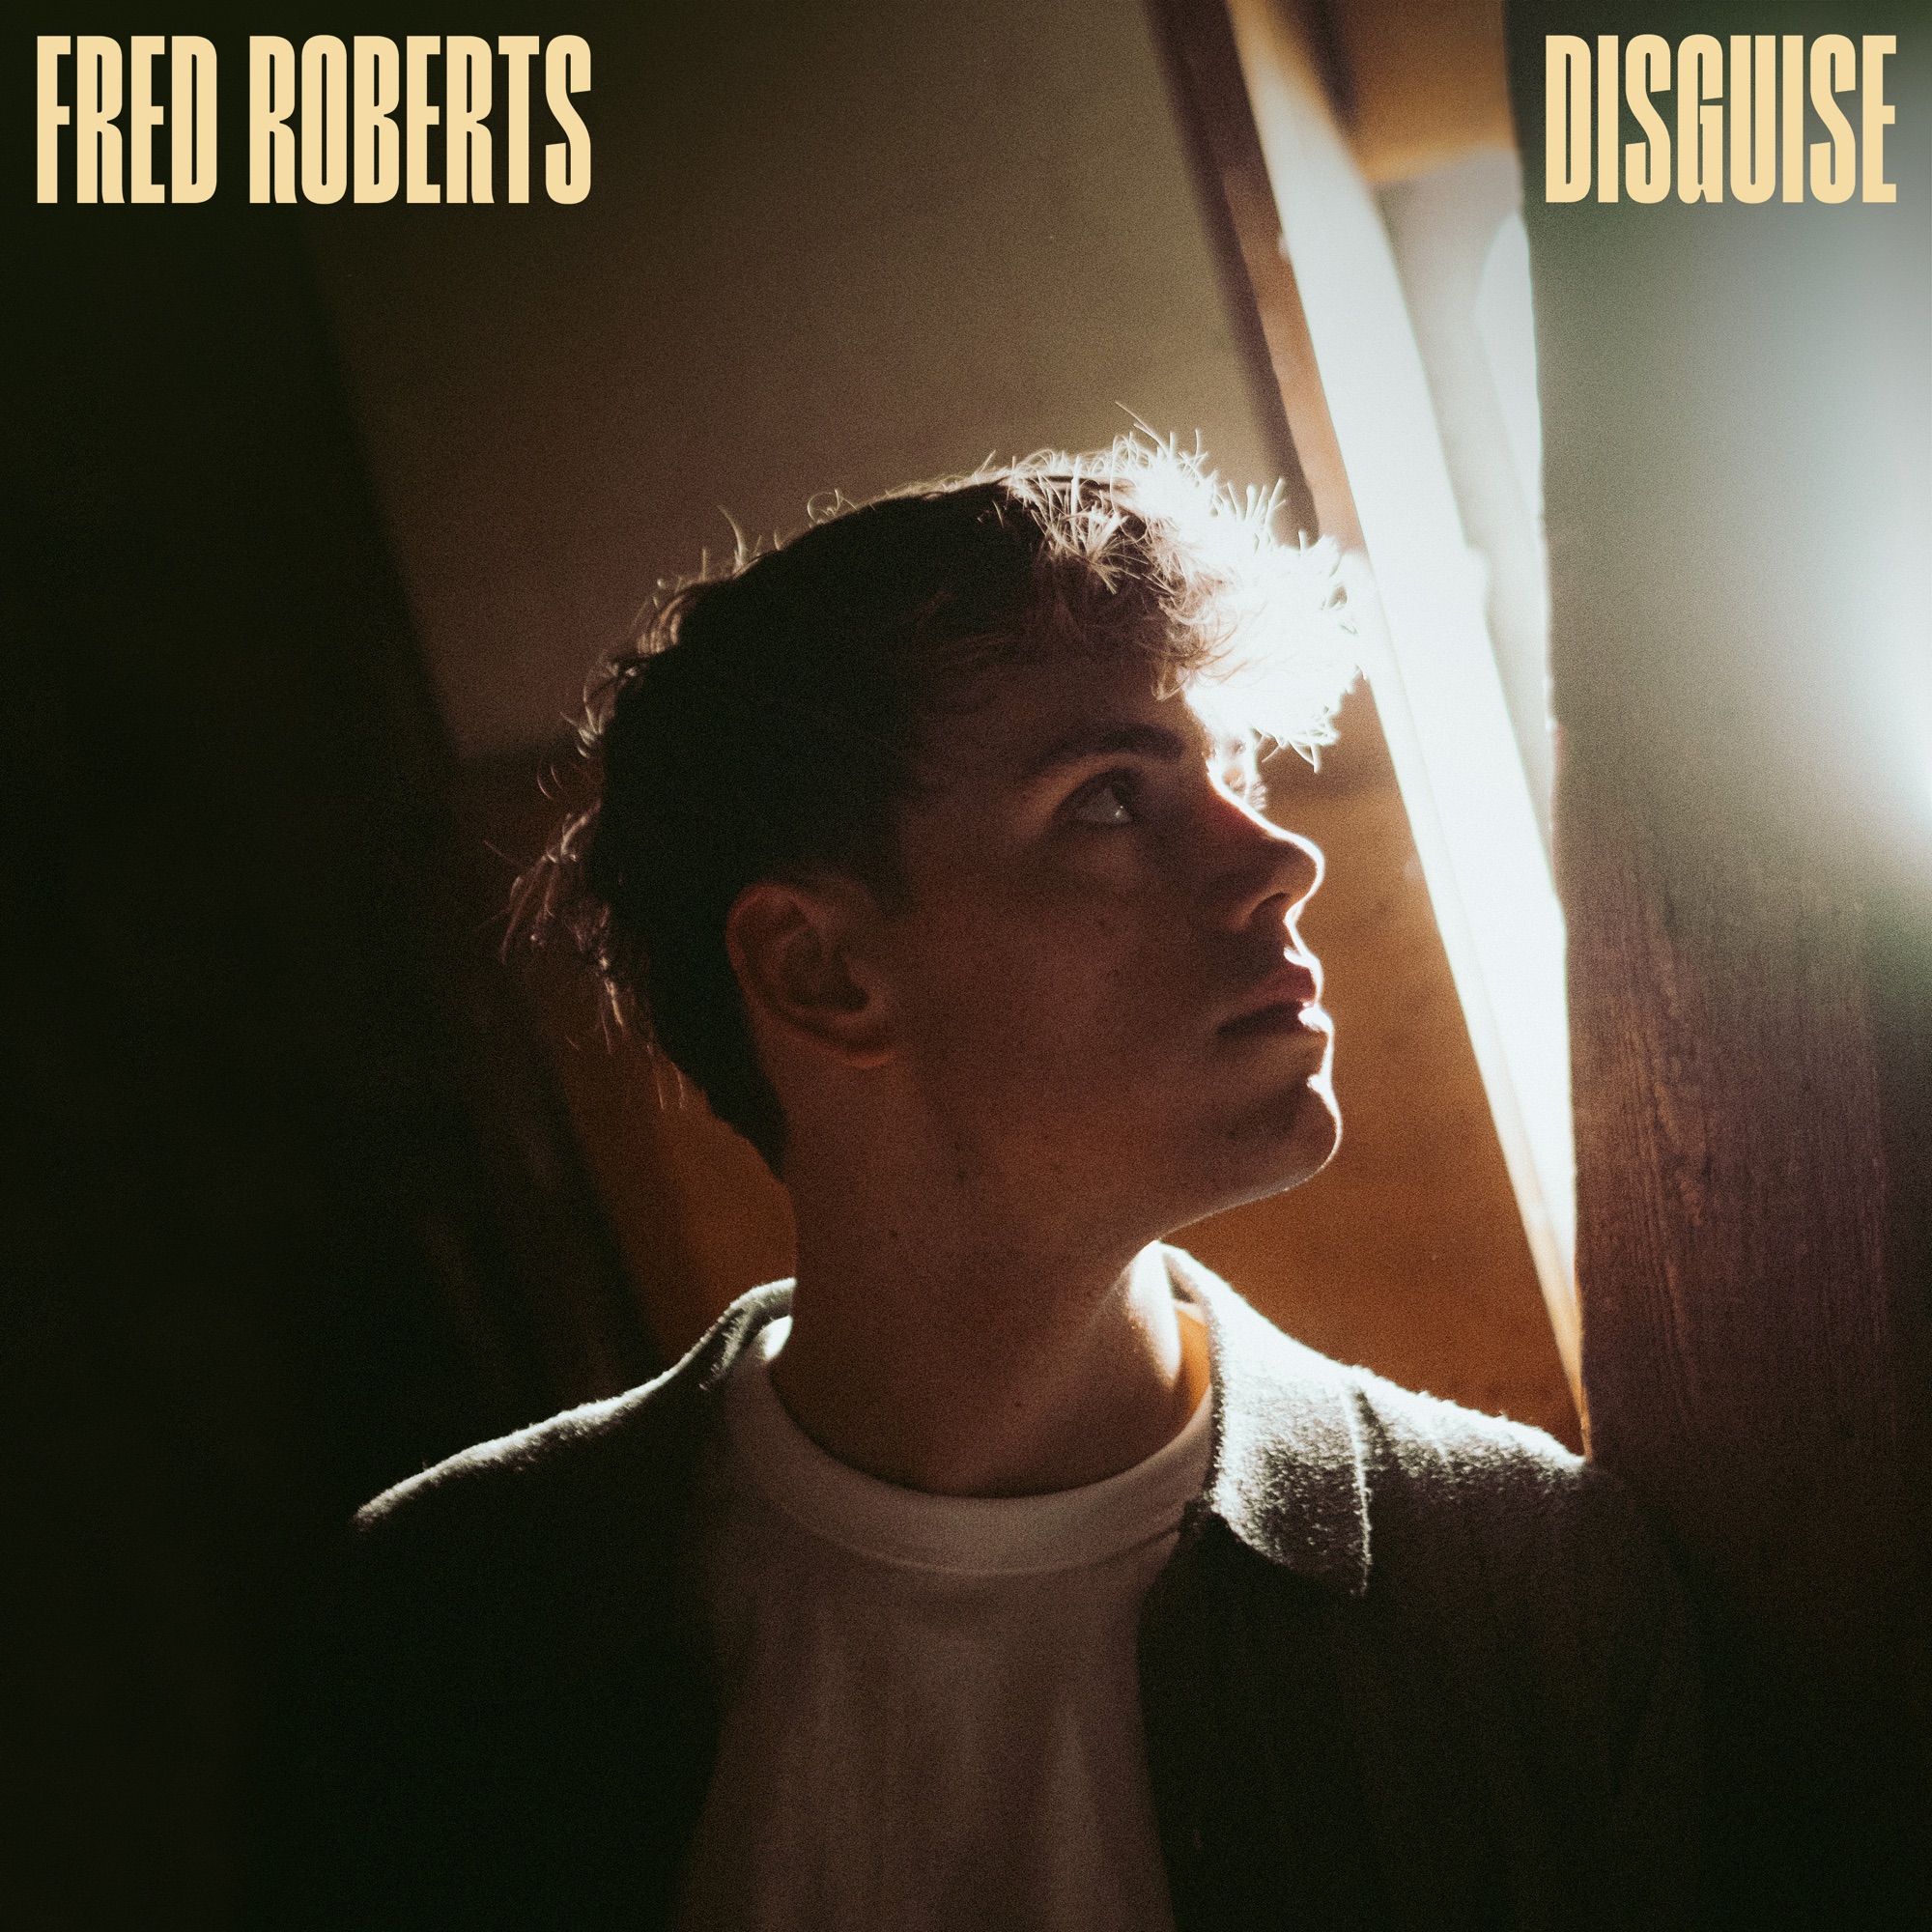 Fred Roberts Disguise cover artwork